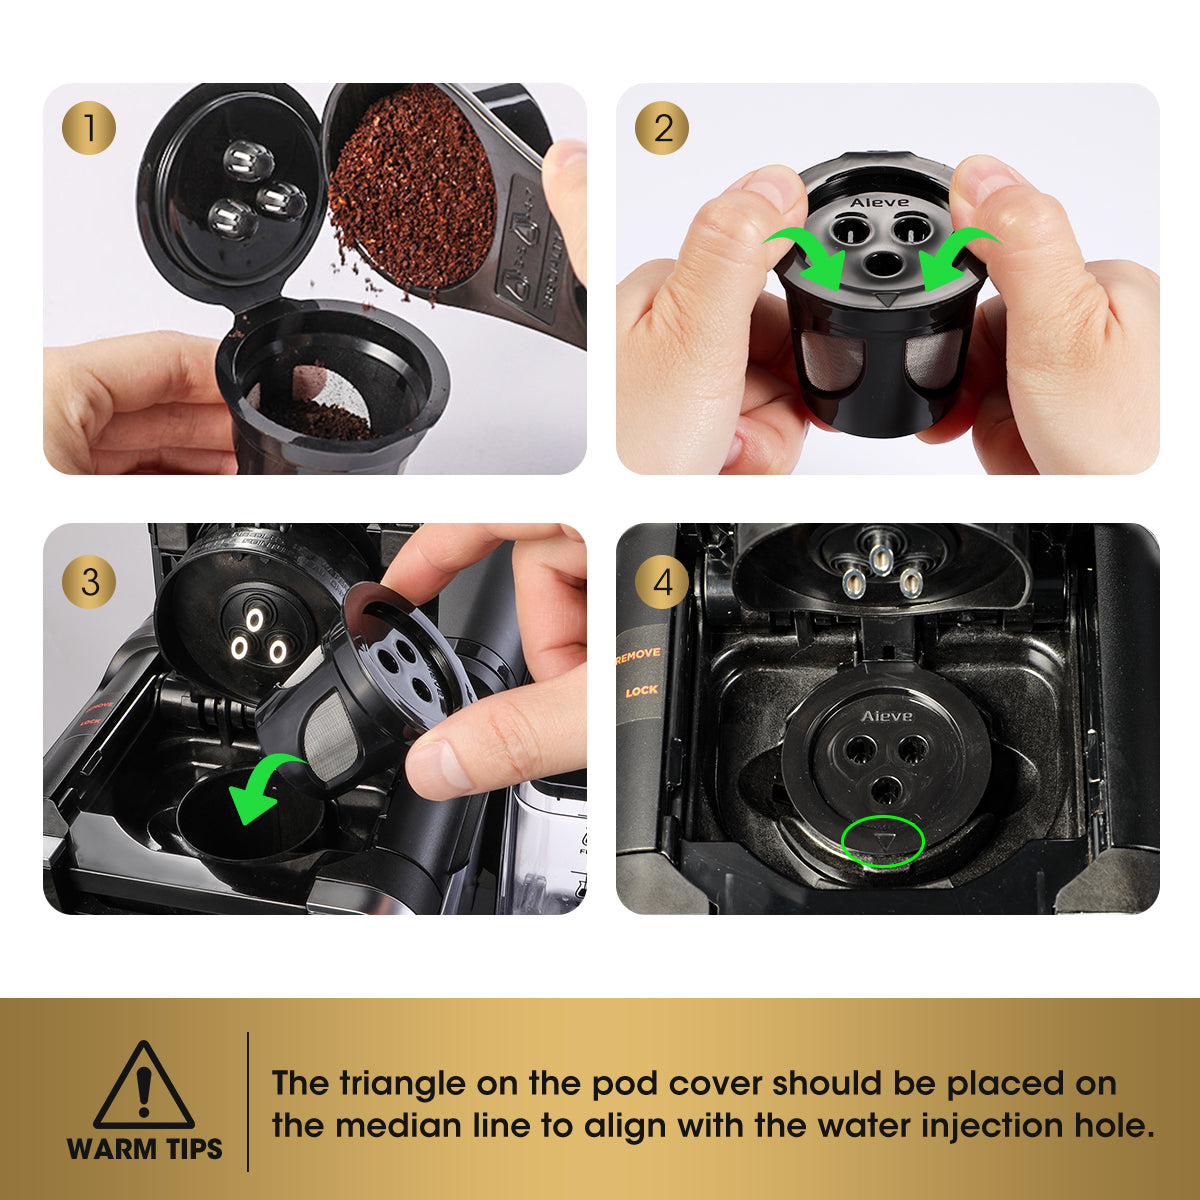 How to use reusable k cup - the triangle on the pod cover should be placed on the median line to align with the water injection hole